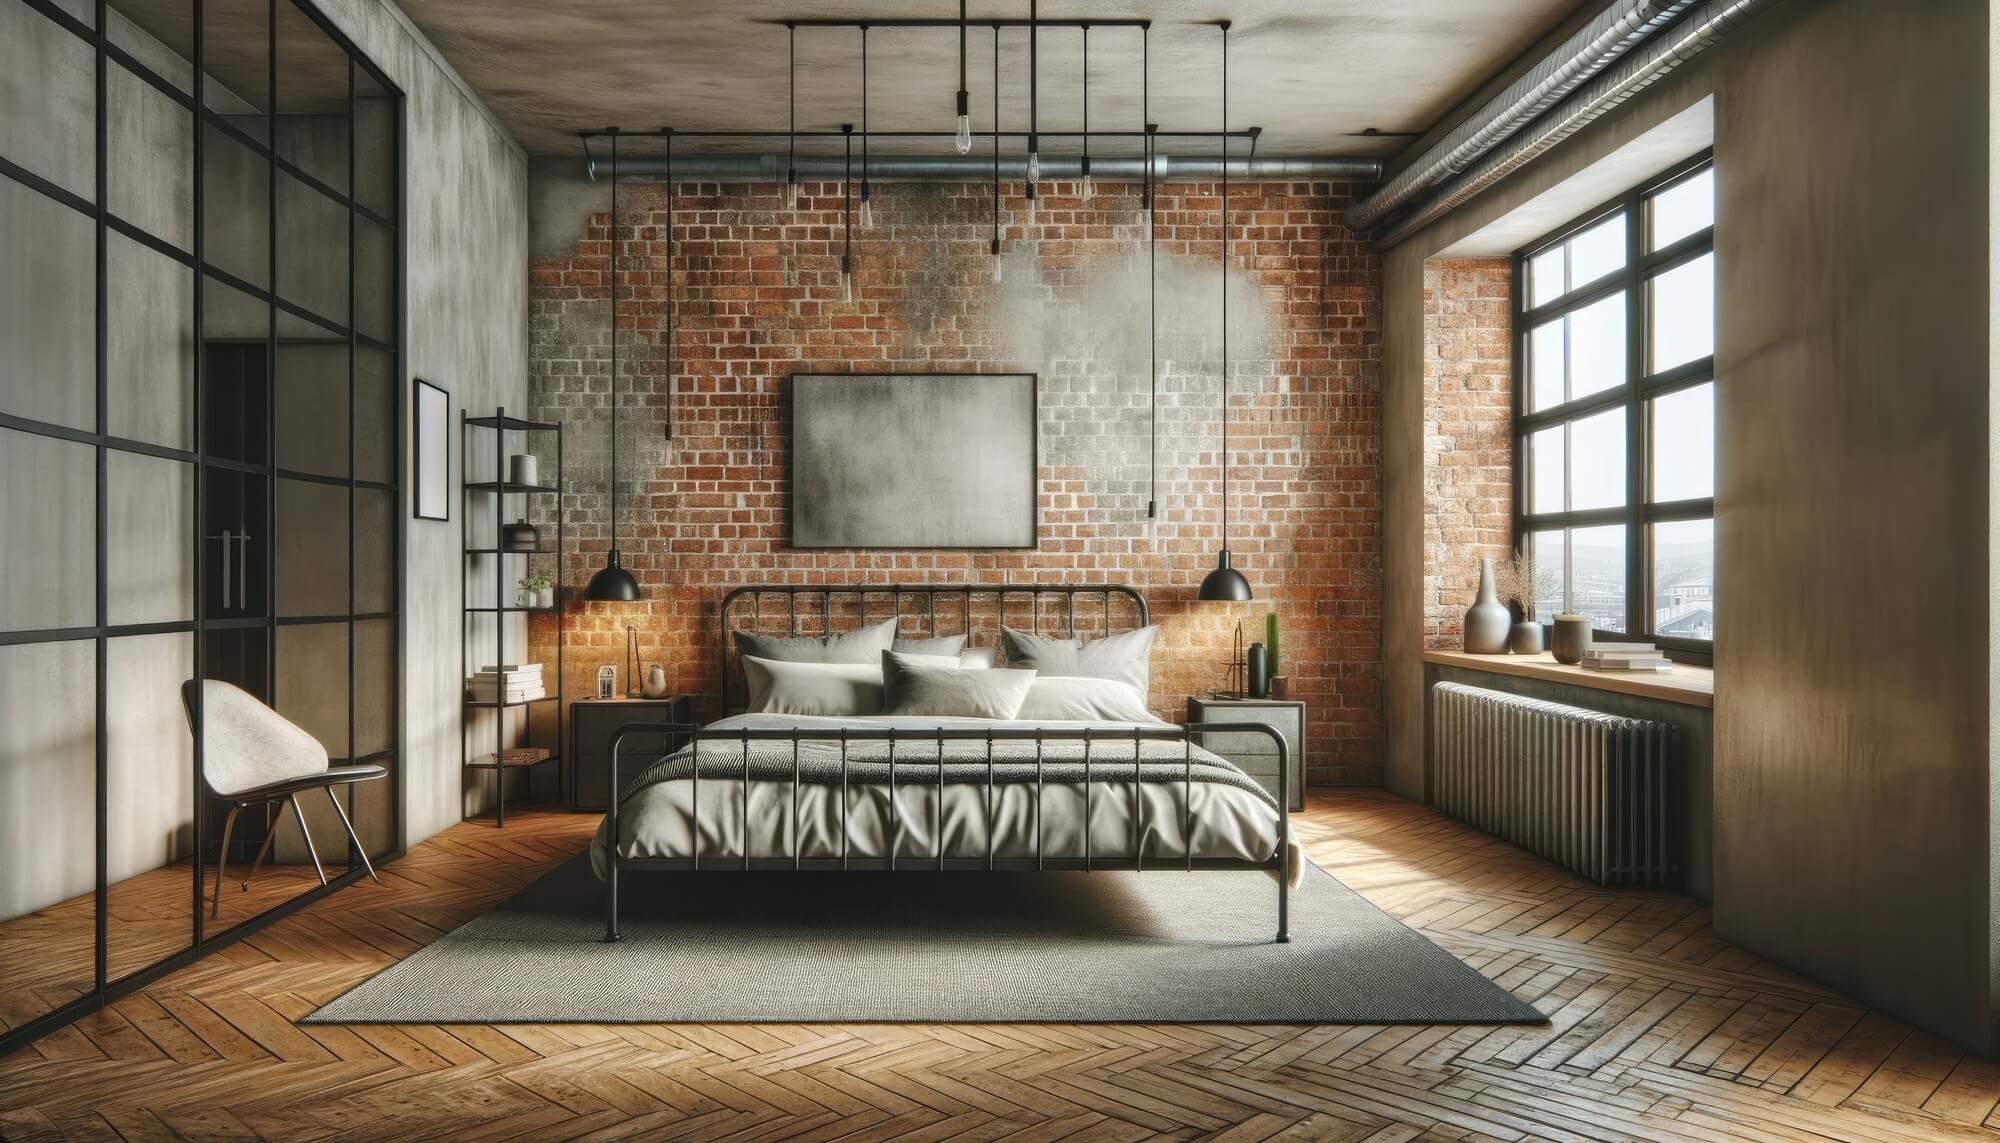 A modern industrial bedroom design with exposed brick walls, a metal bed frame, and minimalist decor. The room features large windows and a neutral color palette.